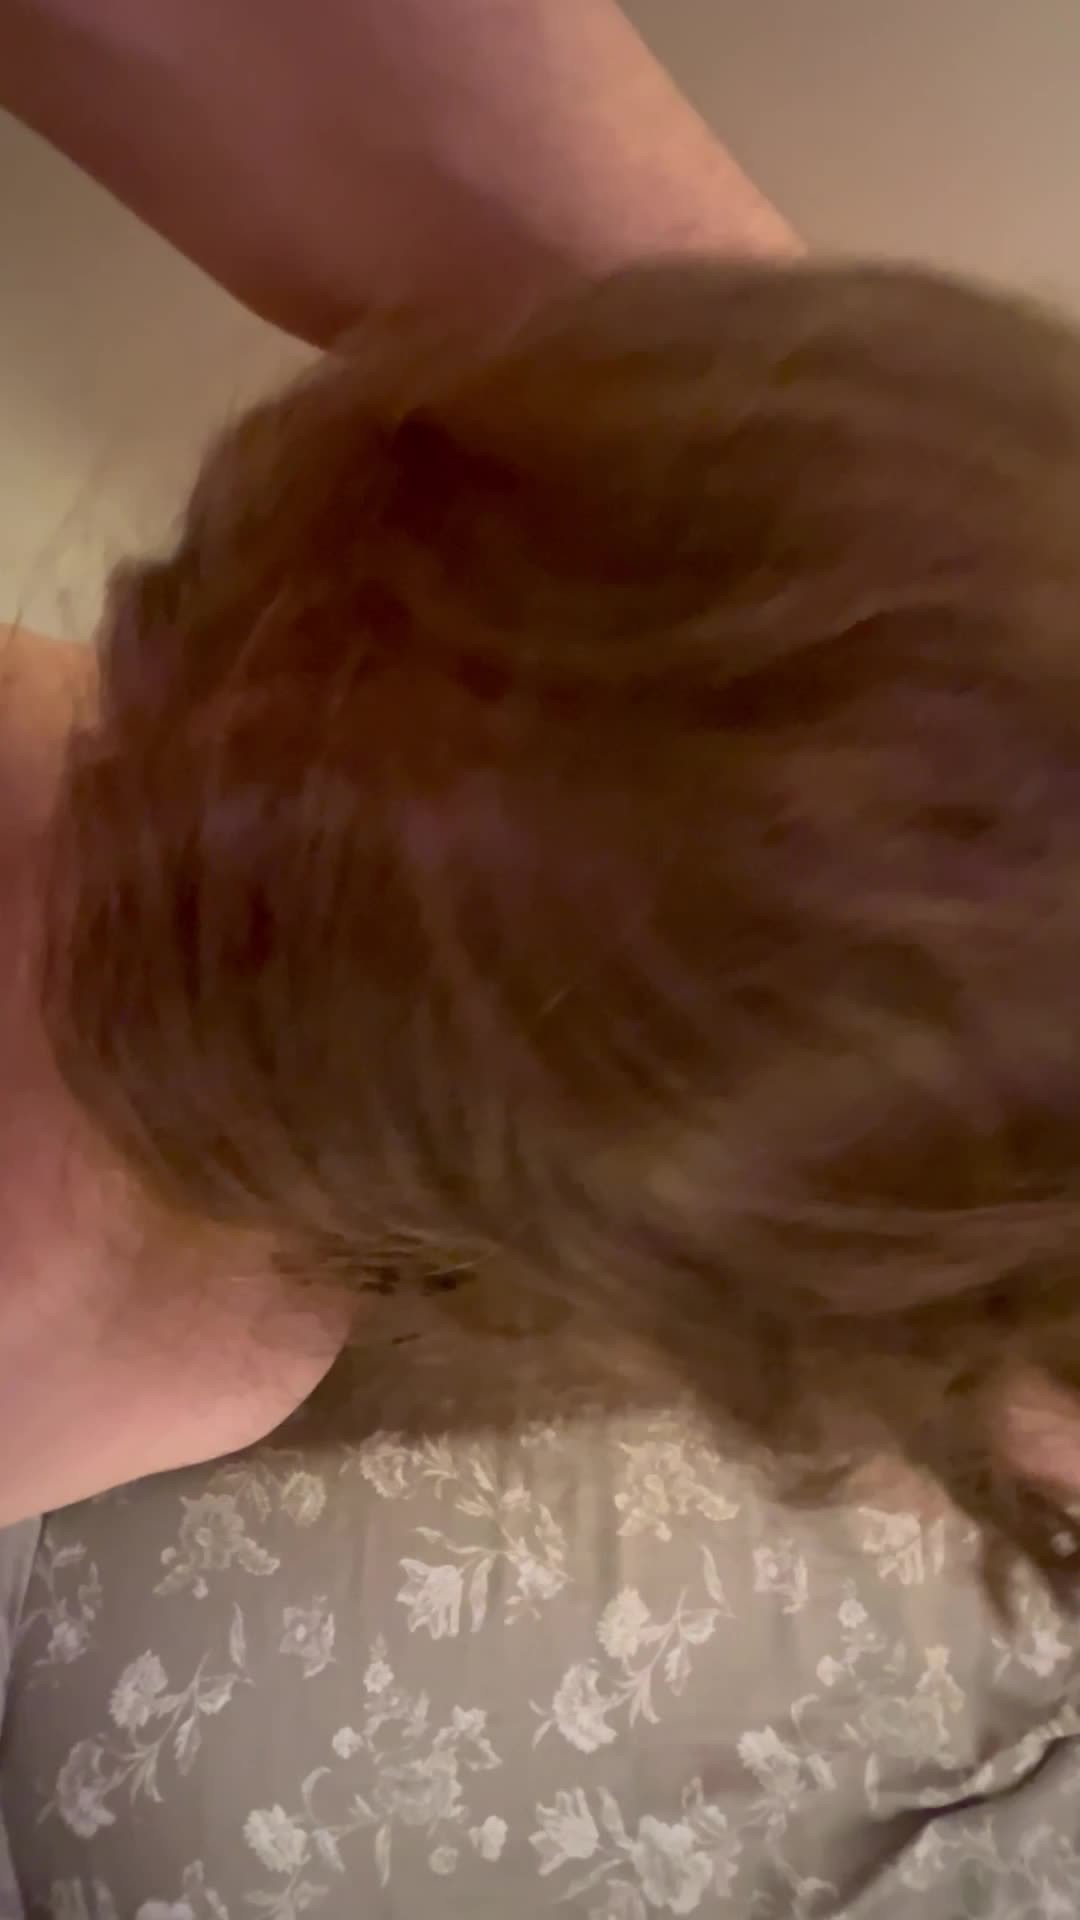 Video by JessicaLipsRabbit with the username @JessicaLipsRabbit, who is a star user,  November 25, 2023 at 9:39 PM and the text says 'I probably shouldn't be sharing this much for free, but I'm horny 🤷‍♀️#redhead #ginger #cumshot #cum #cumslut #cumontits #cumonmytits
https://linktr.ee/jessicalipsrabbit'